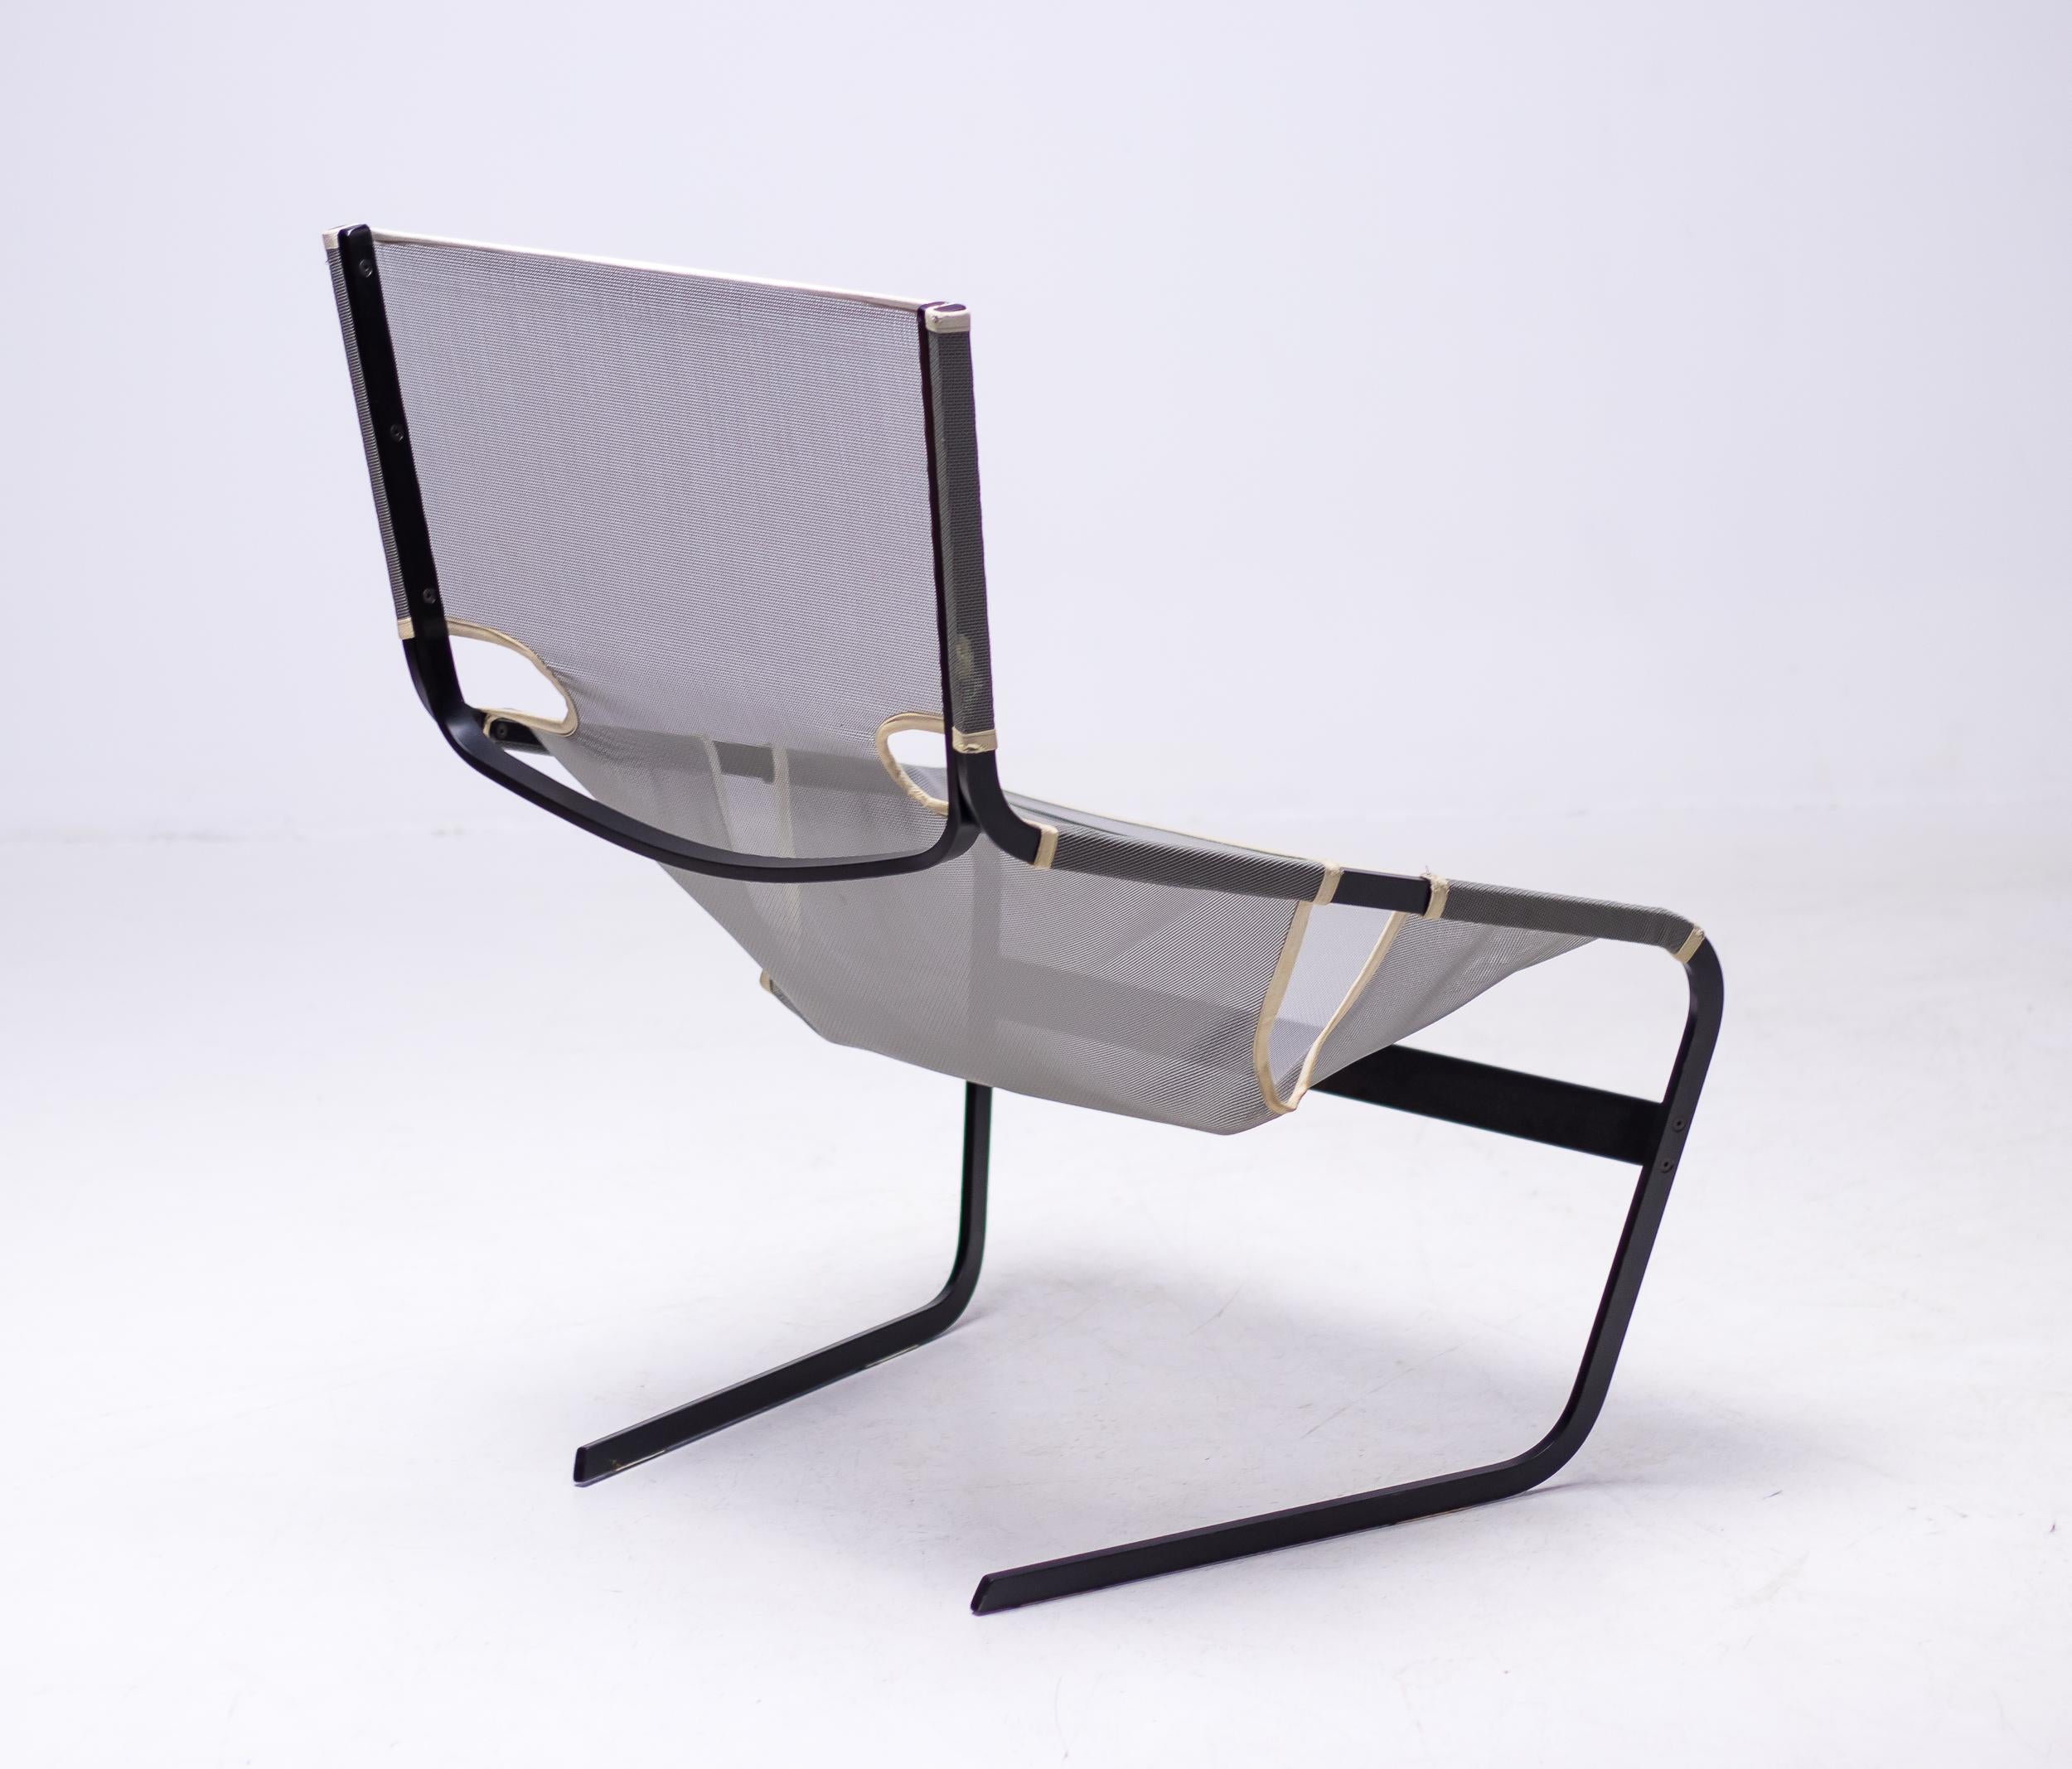 Easy chair by Pierre Paulin, metal and mesh, F444, the Netherlands, circa 1965.  This mesh F-444 chair is designed by Pierre Paulin for Artifort in 1962. This chair shows sharp lines and features an angled open frame that provides a floating seat.